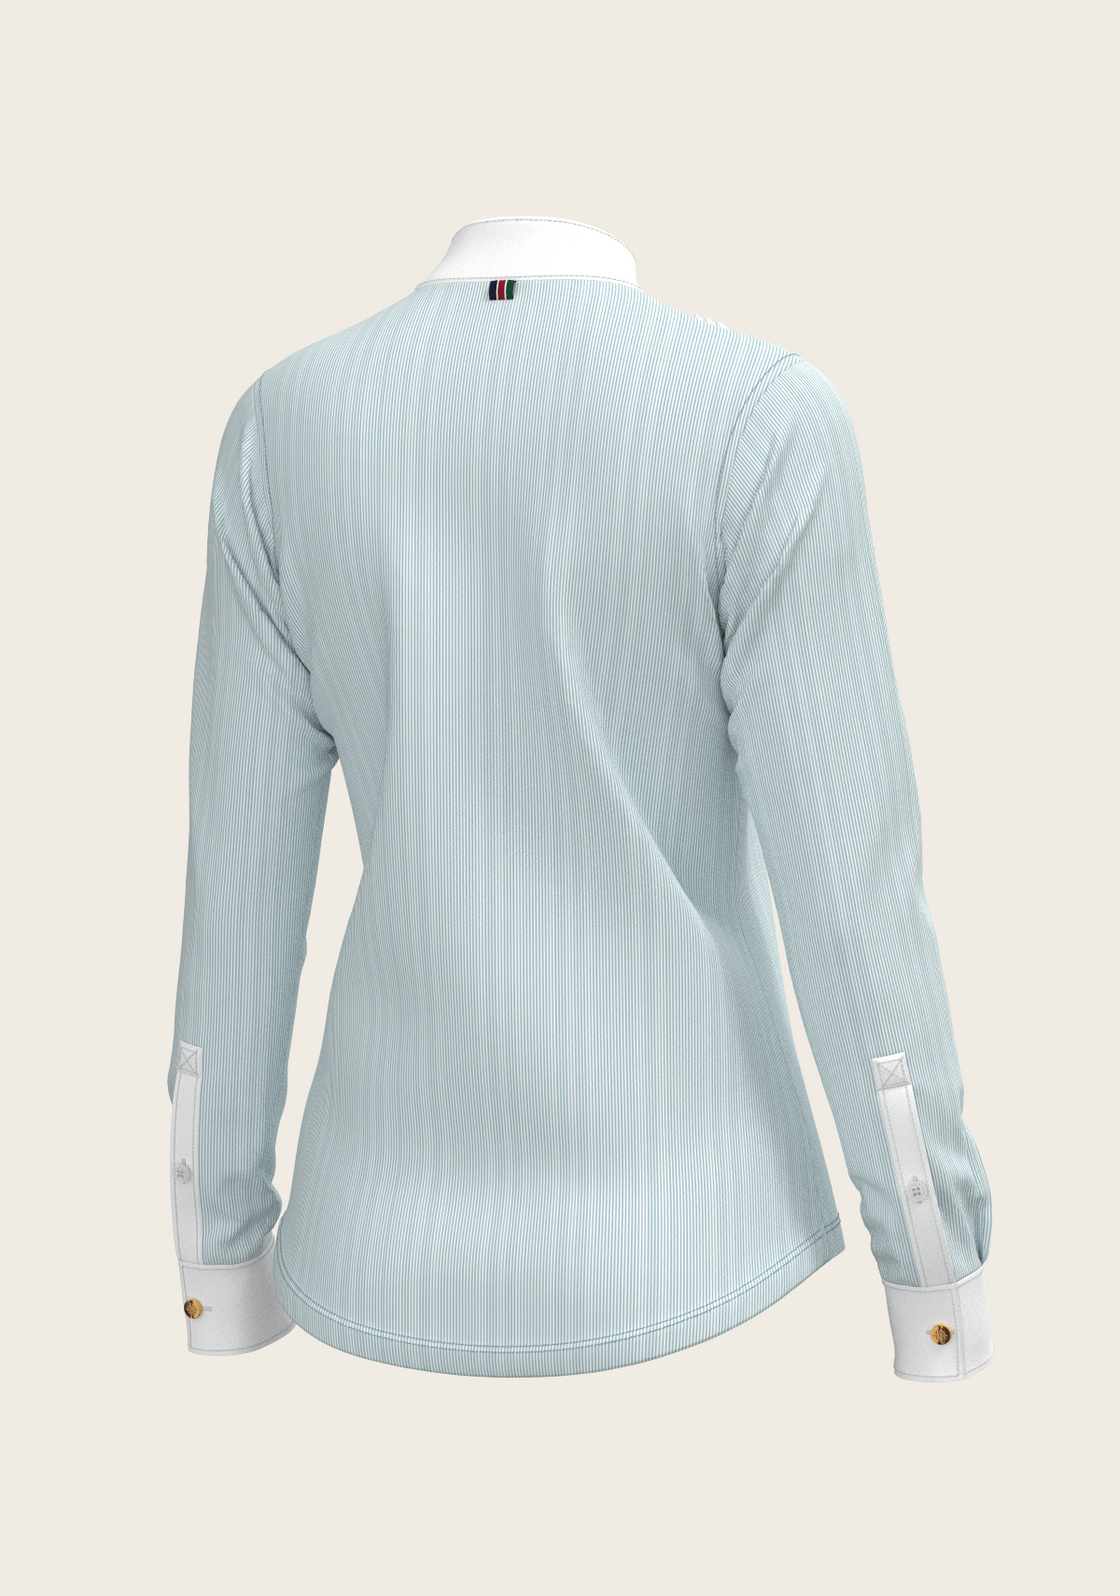  Stripes in Sky Blue Short Pleated Long Sleeve Show Shirt